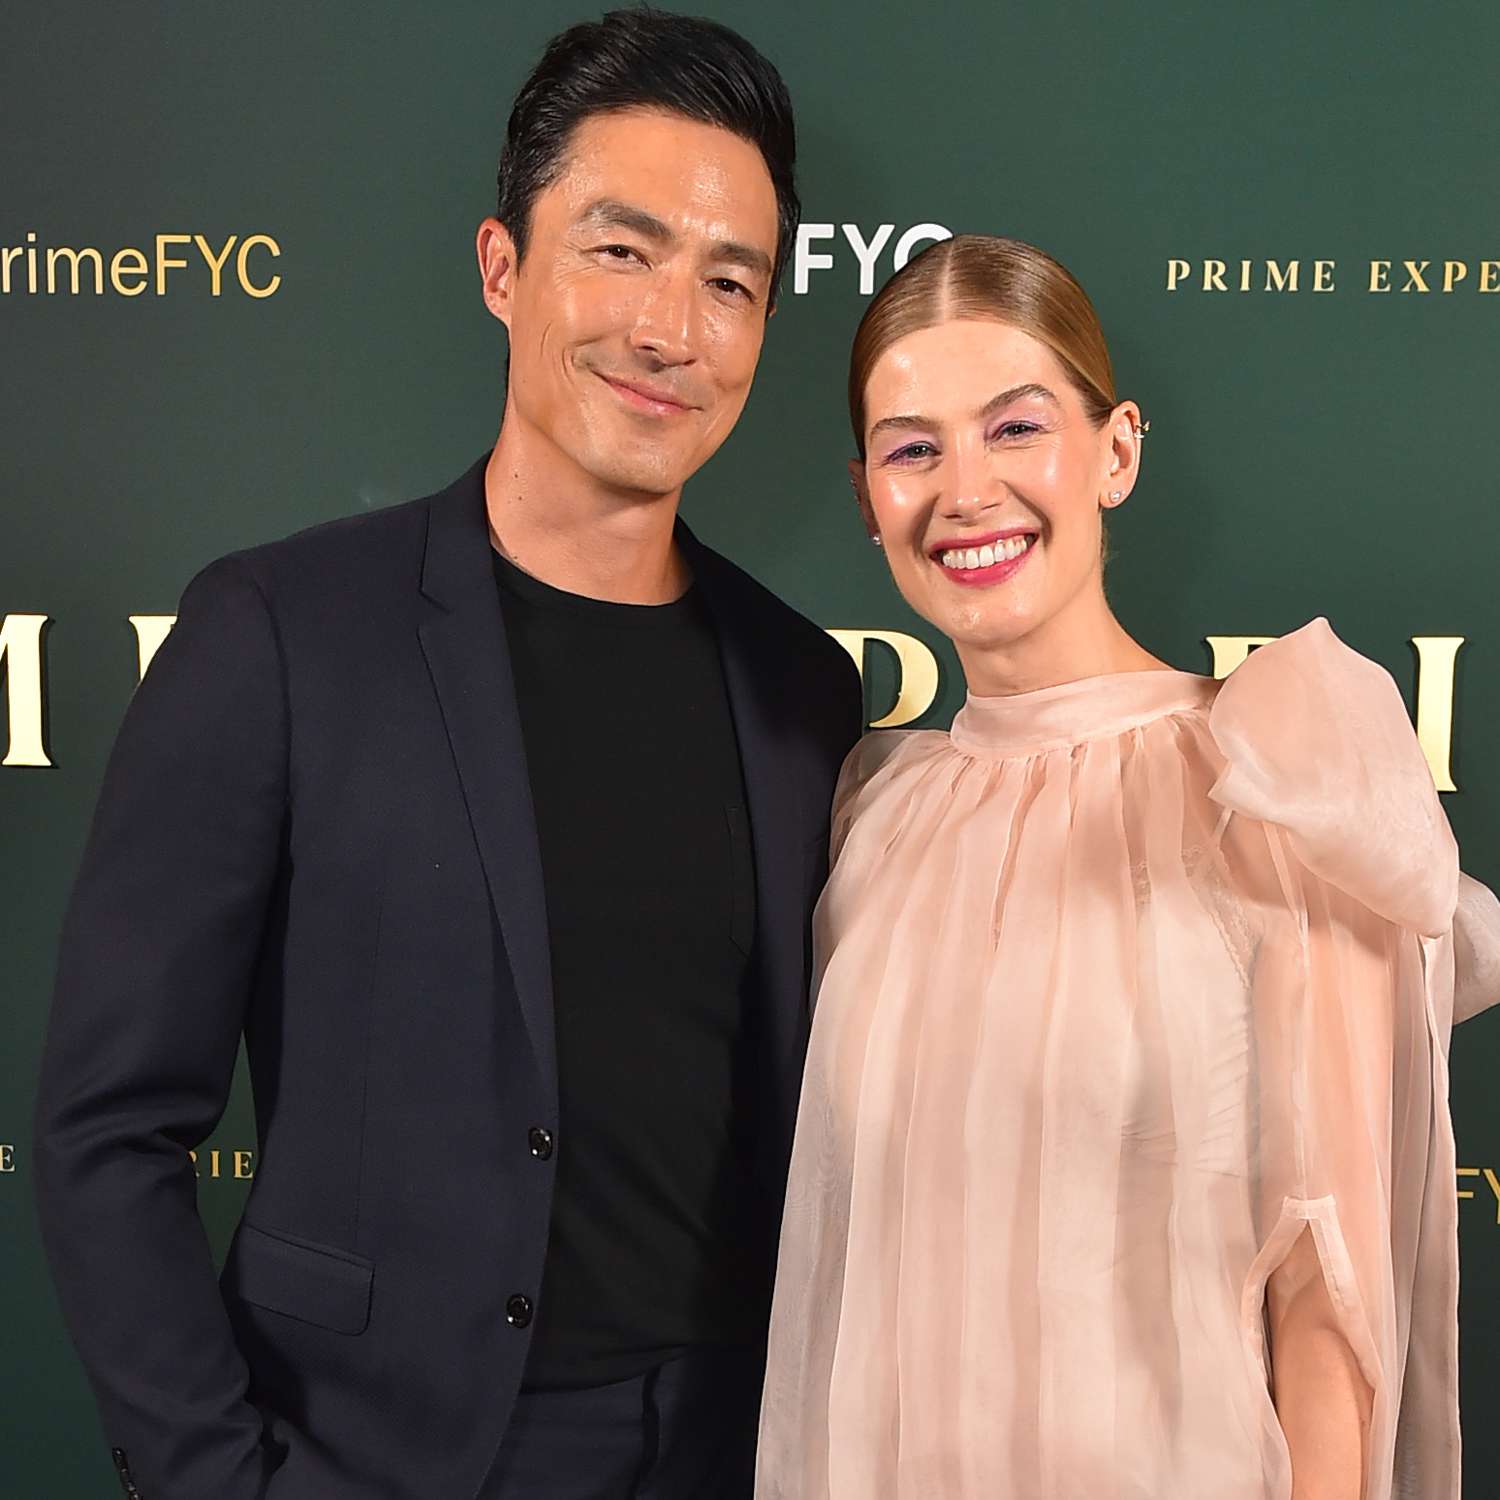 Rosamund Pike and Daniel Henney attend The Wheel of Time | Emmys FYC Event at Prime